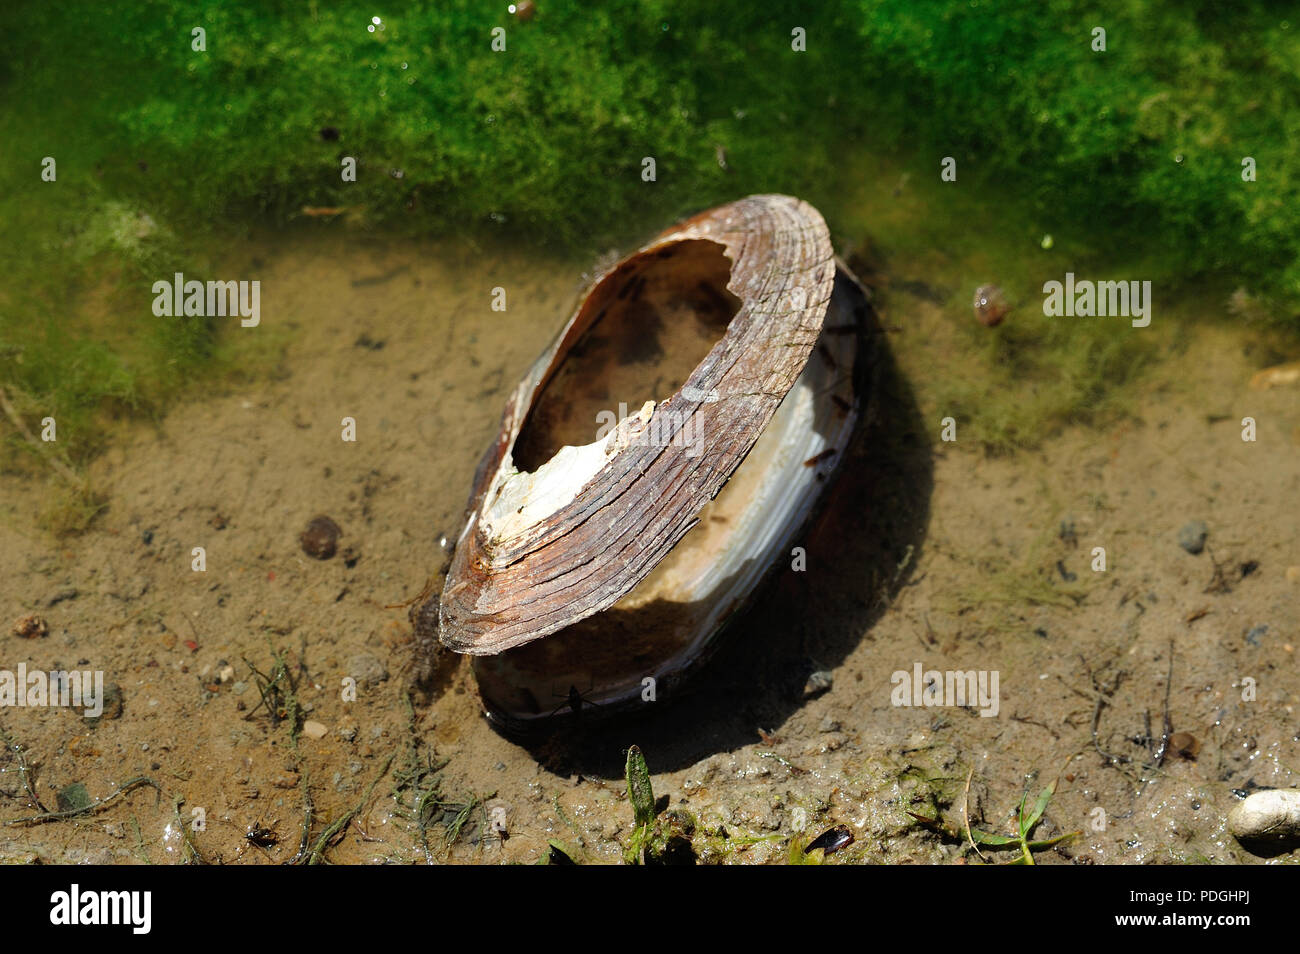 empty freshwater mussel shell at edge of pond Stock Photo